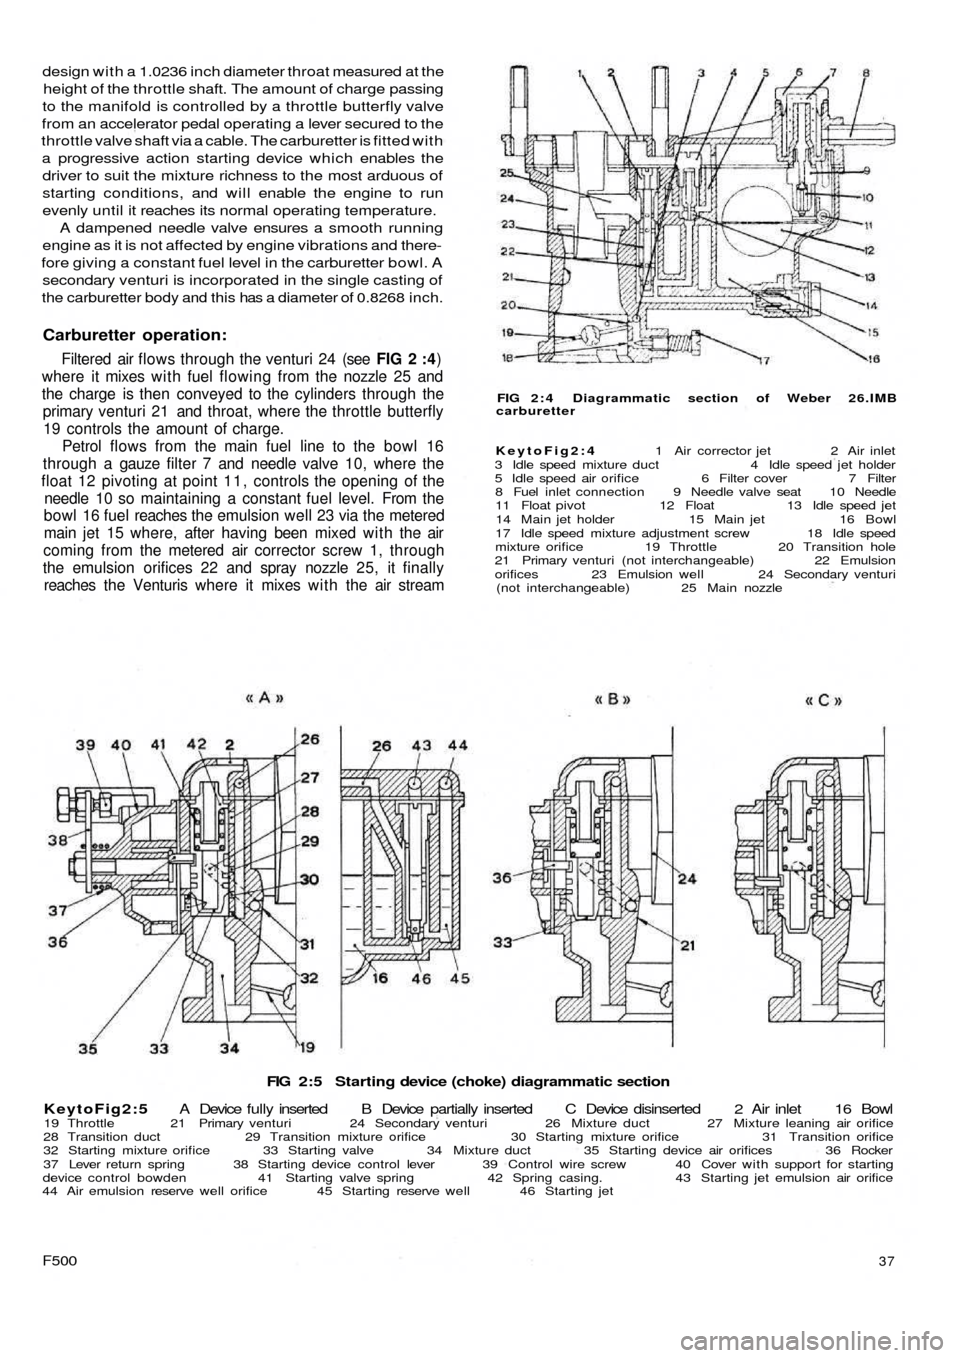 FIAT 500 1971 1.G Workshop Manual FIG 2:5  Starting device (choke) diagrammatic section
KeytoFig2:5 A  Device  fully inserted  B  Device  partially  inserted  C  Device  disinserted  2  Air  inlet 16 Bowl
19 Throttle  21 Primary ventu